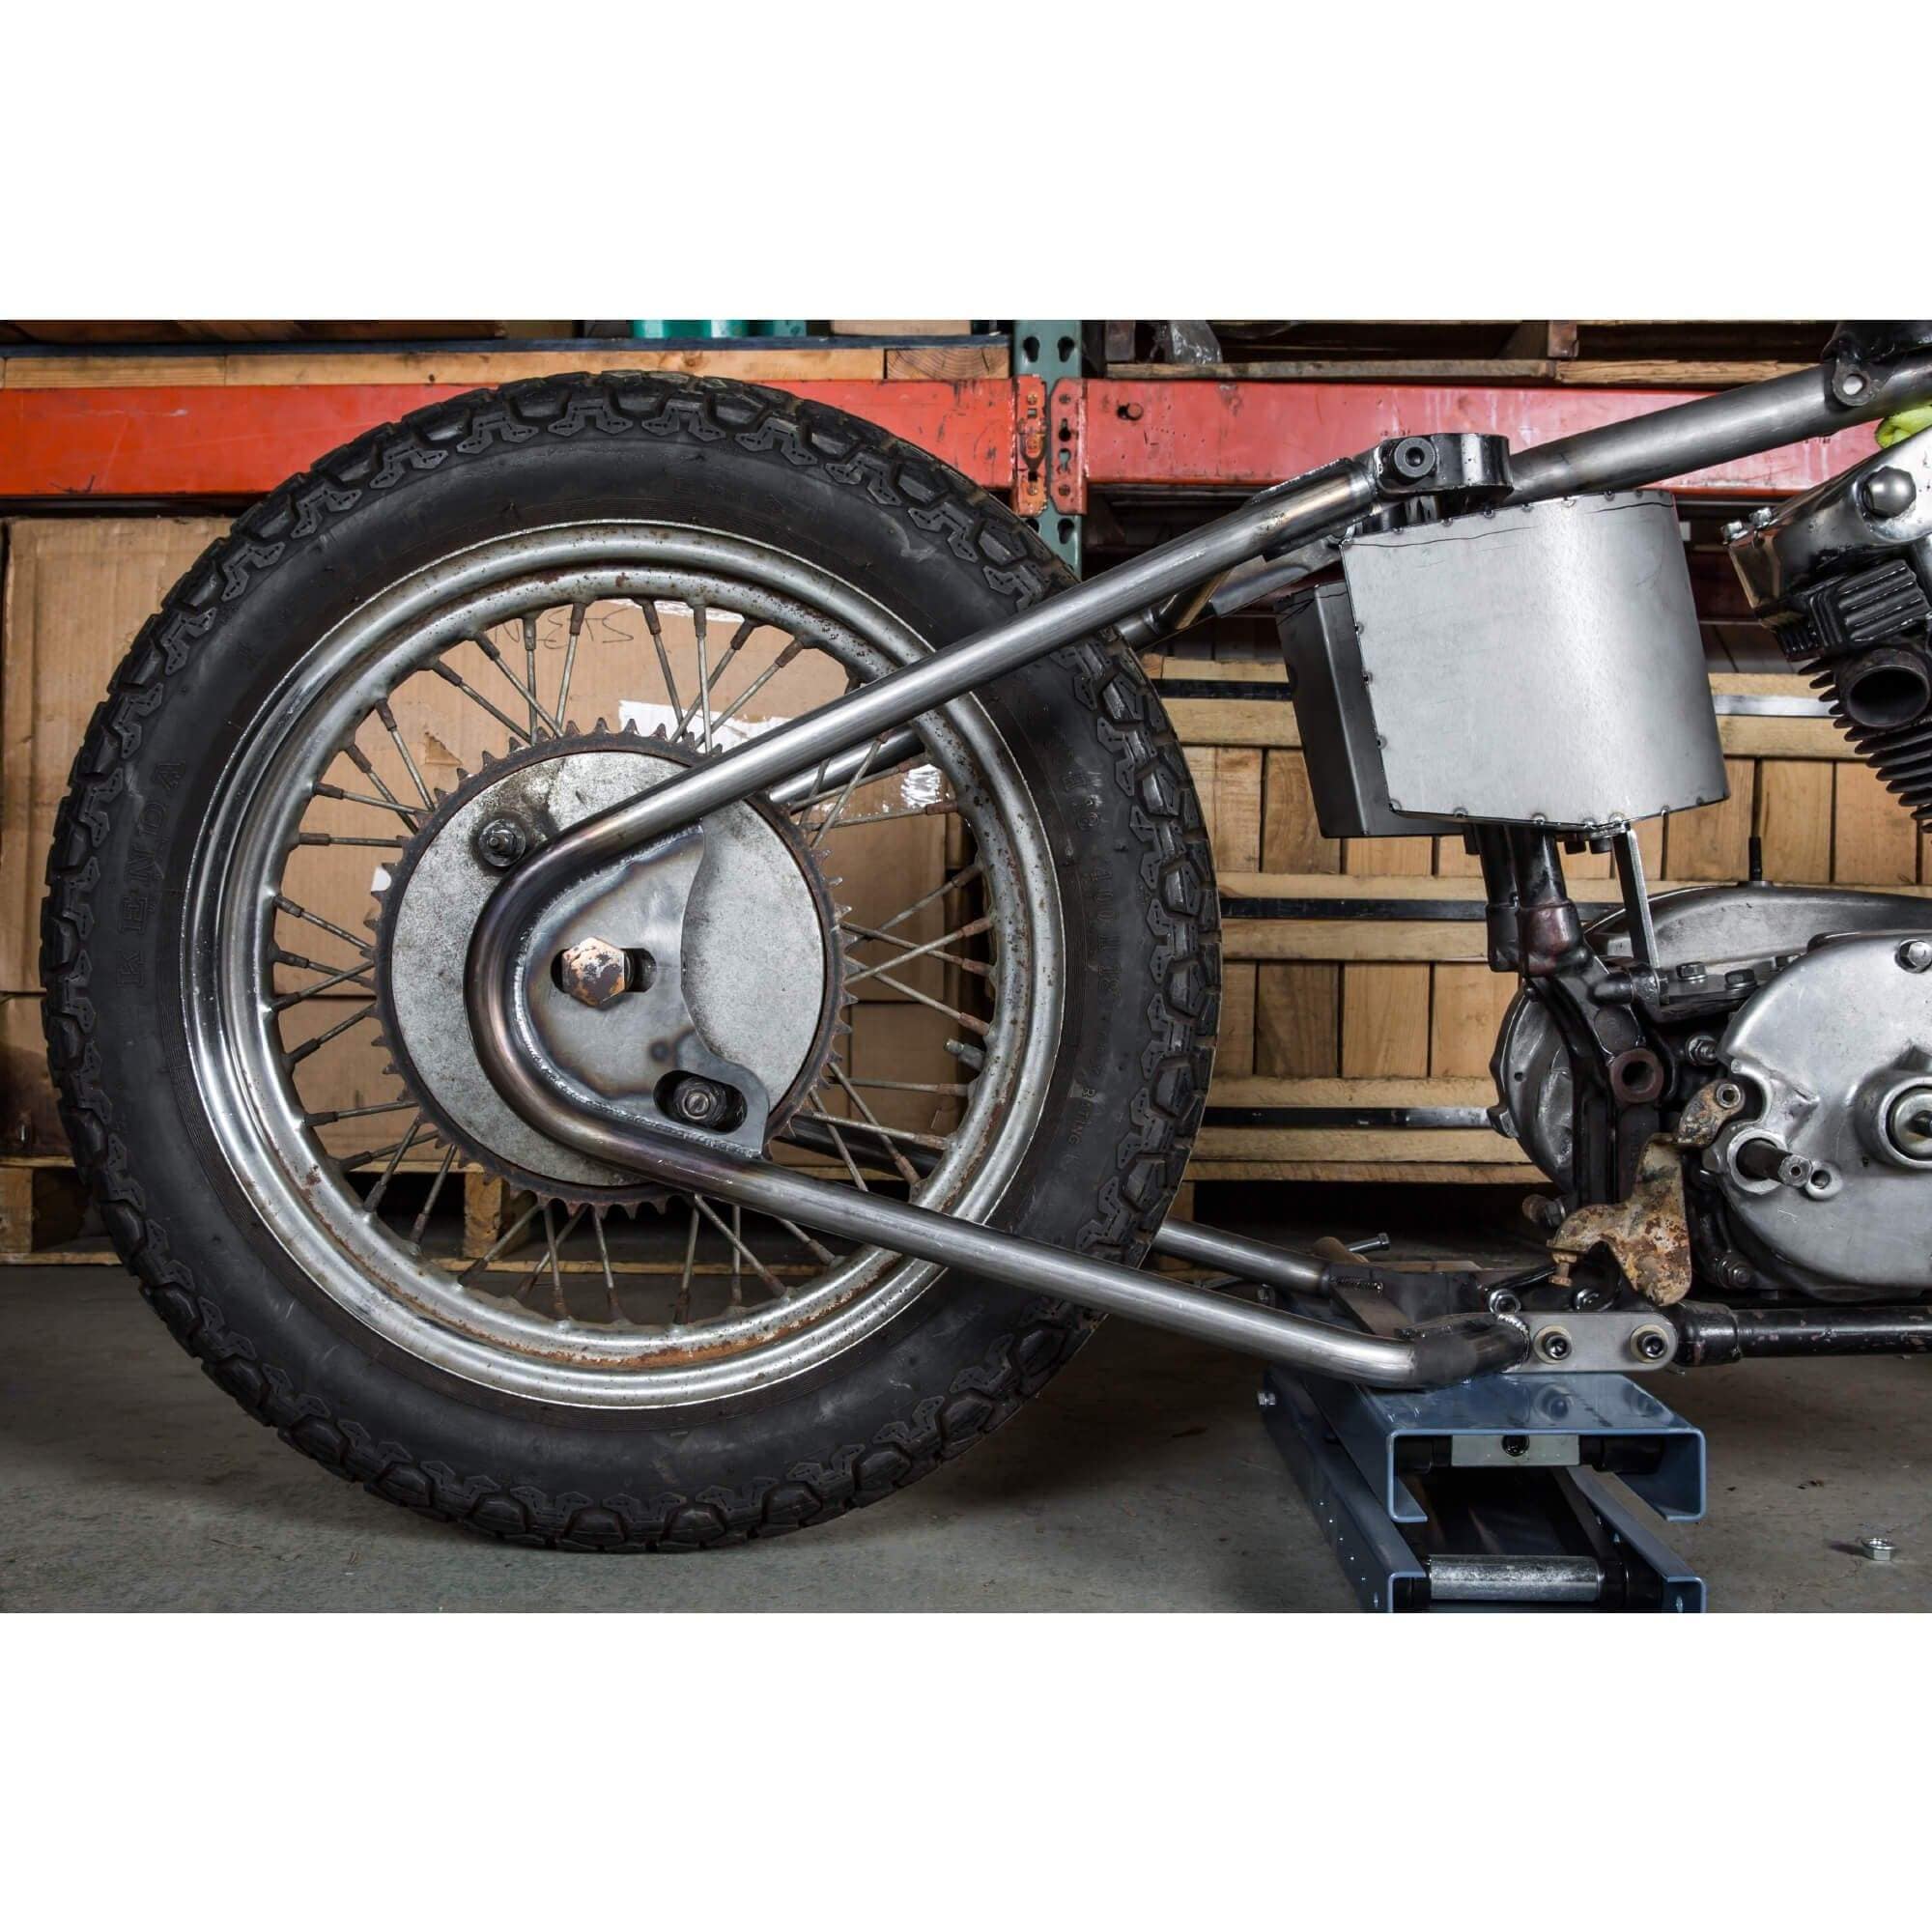 Lowbrow Customs Kr Style Bolt On Hardtail Rear Frame Section For 1967 1978 H D Ironhead Sportster